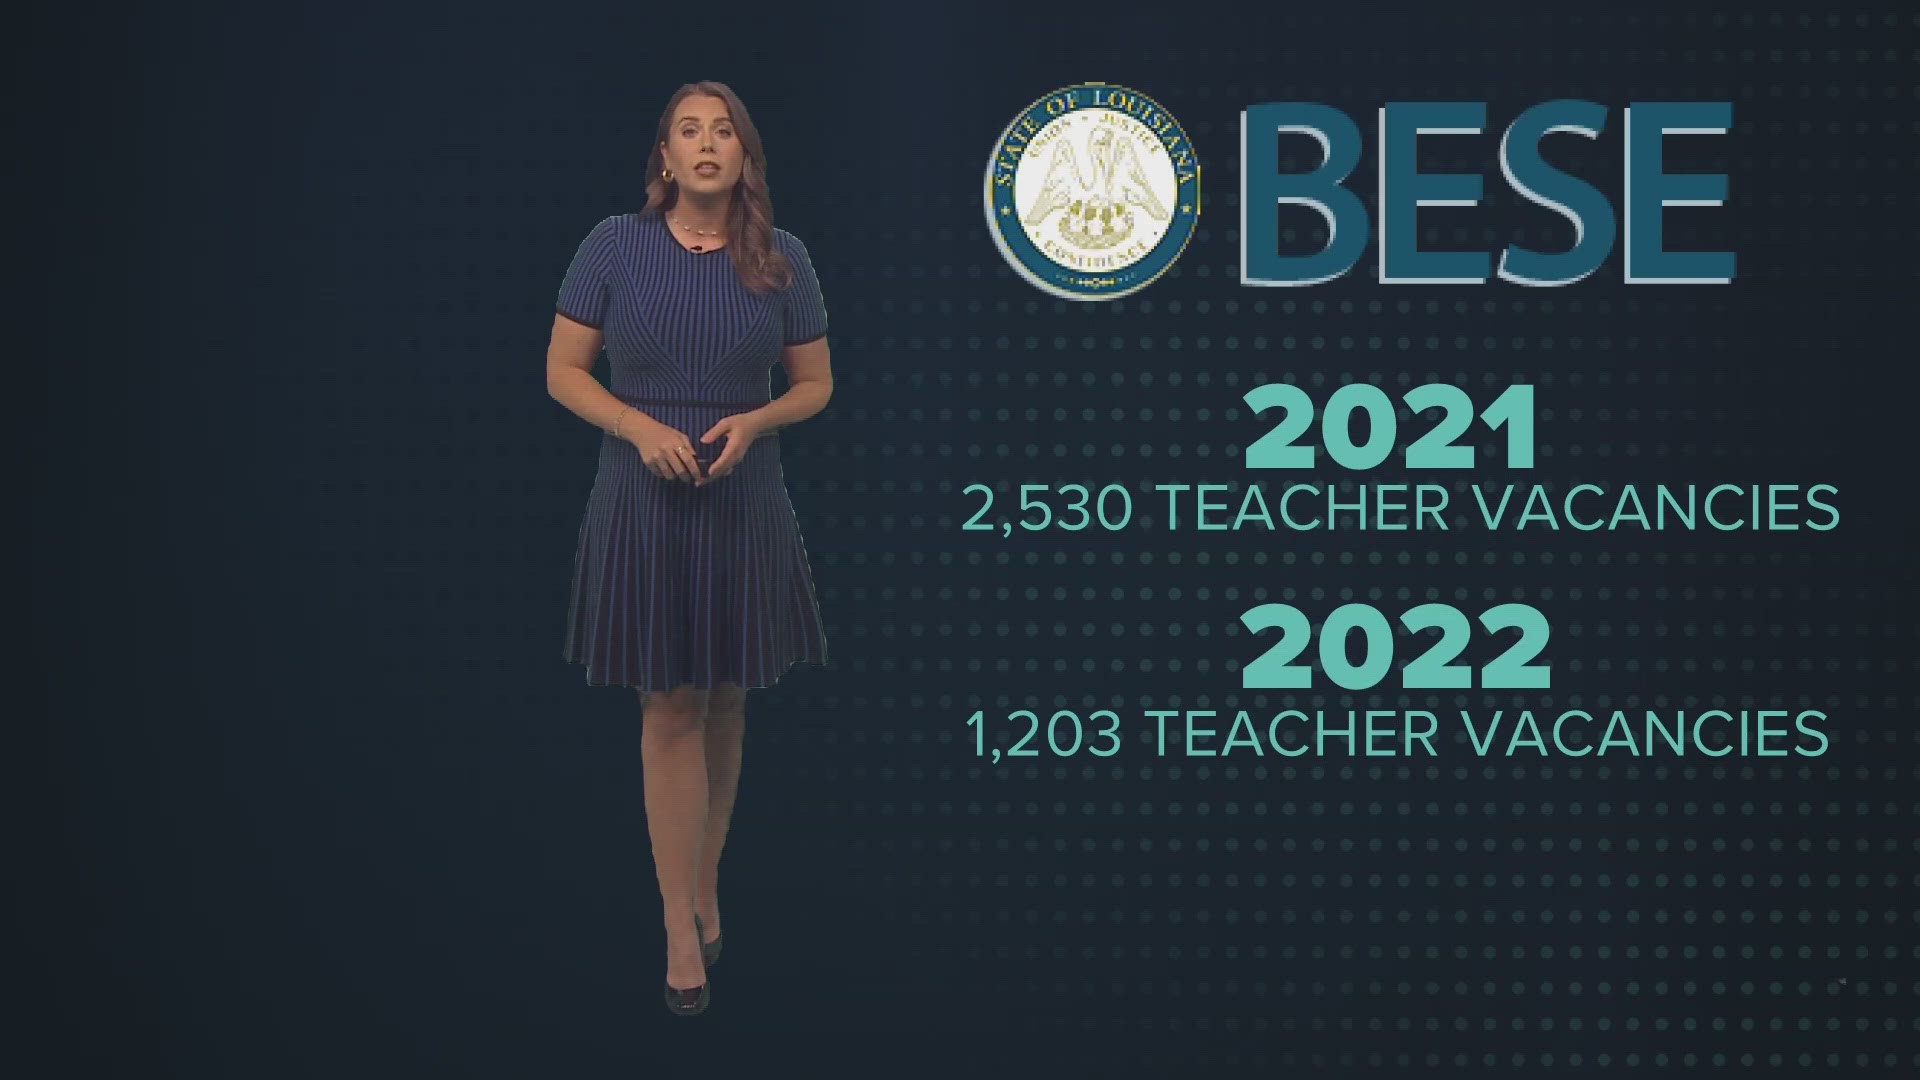 Wednesday, BESE unanimously passed a new funding formula that includes $2,000 raises across the board for certificated teachers and $1,000 raises for support staff.